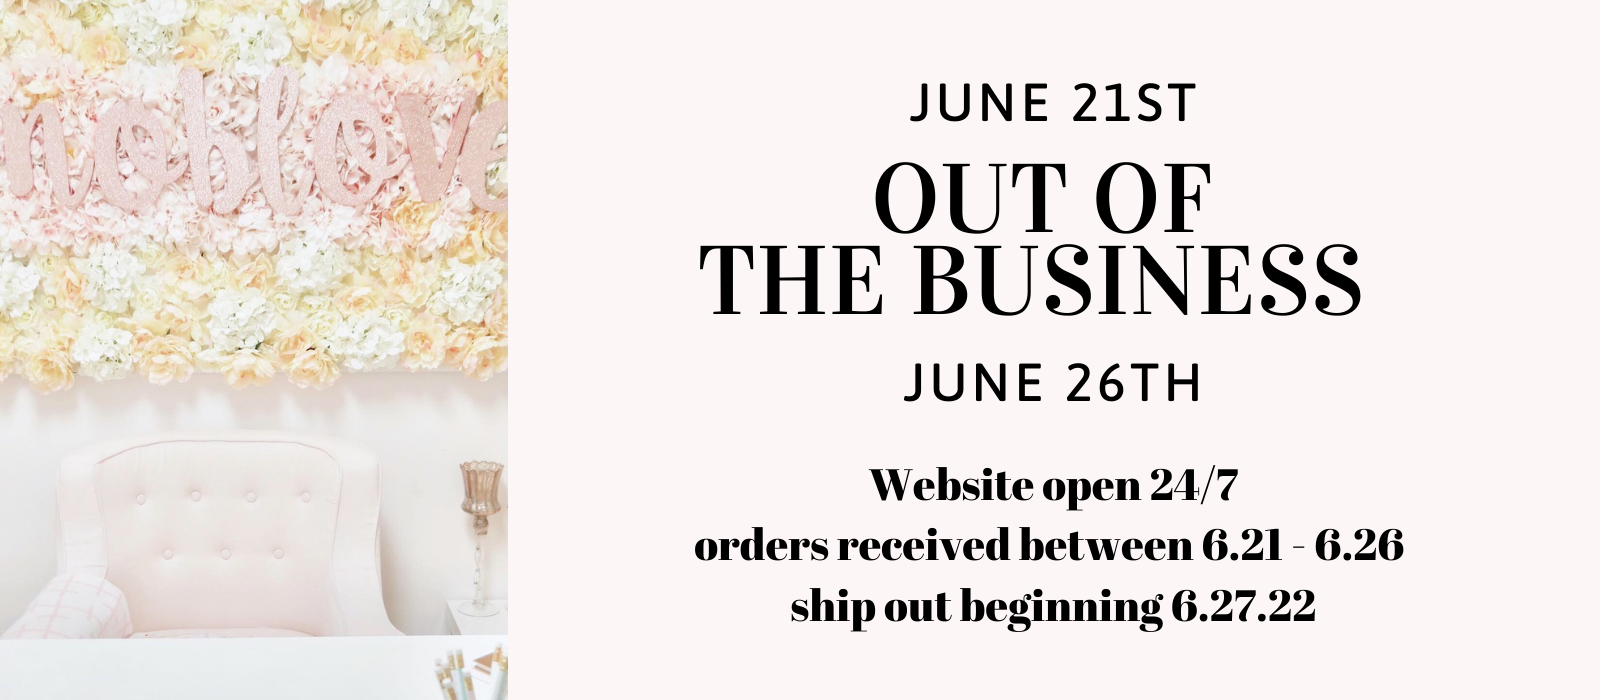 Out of the business June 21 to June 26 2022